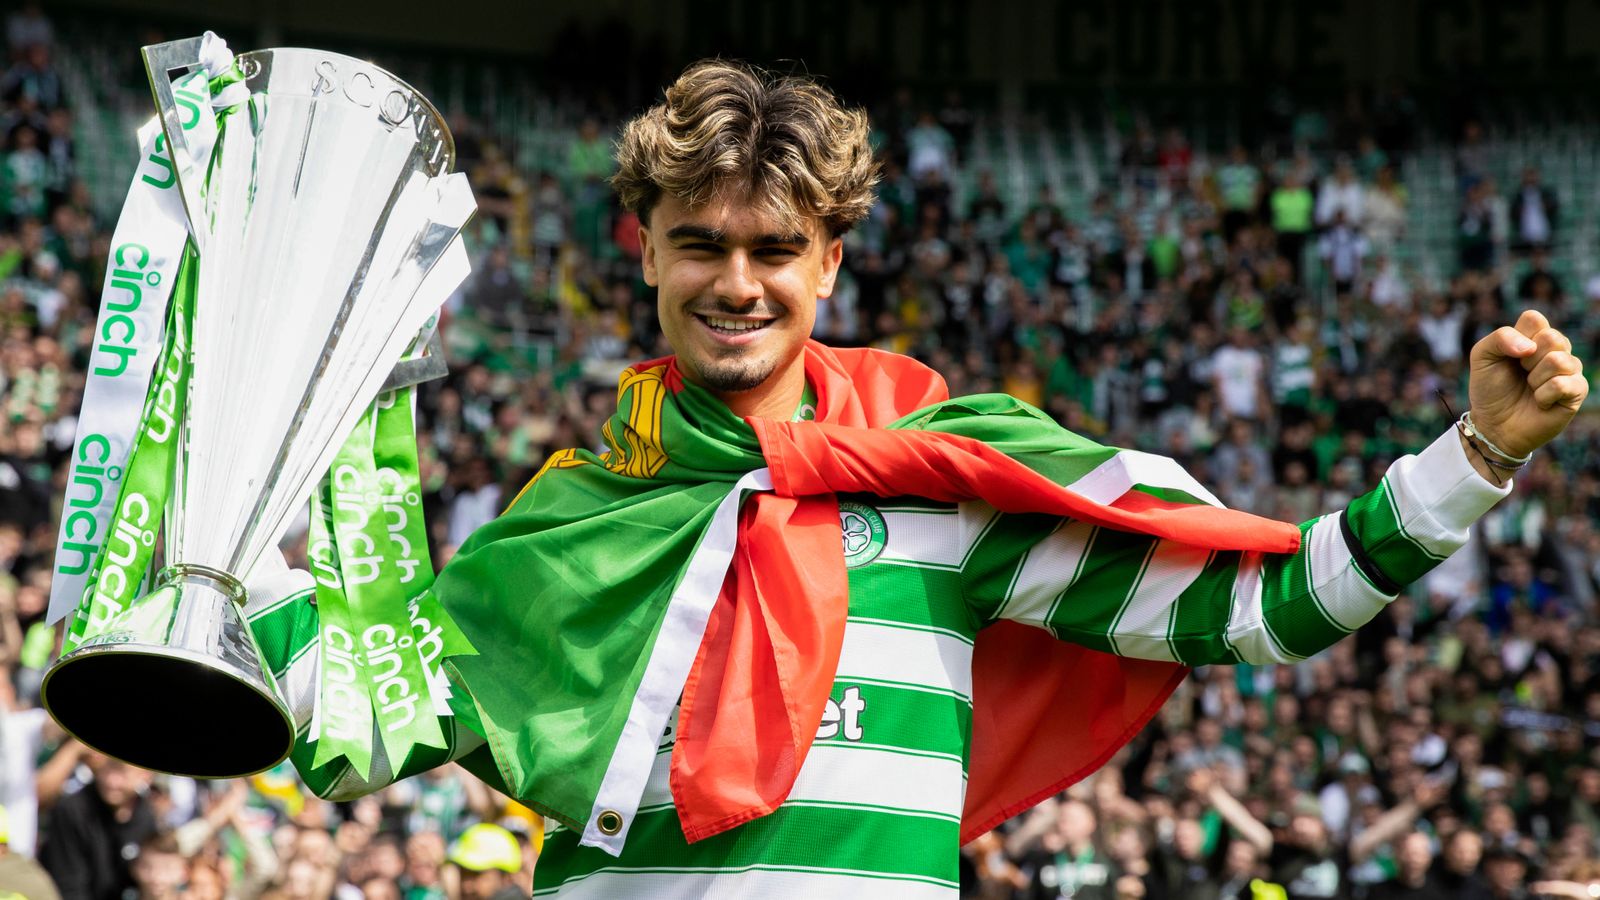 Celtic: Jota close to joining in permanent deal; Man City duo Ko Itakura and Taylor Harwood-Bellis being monitored